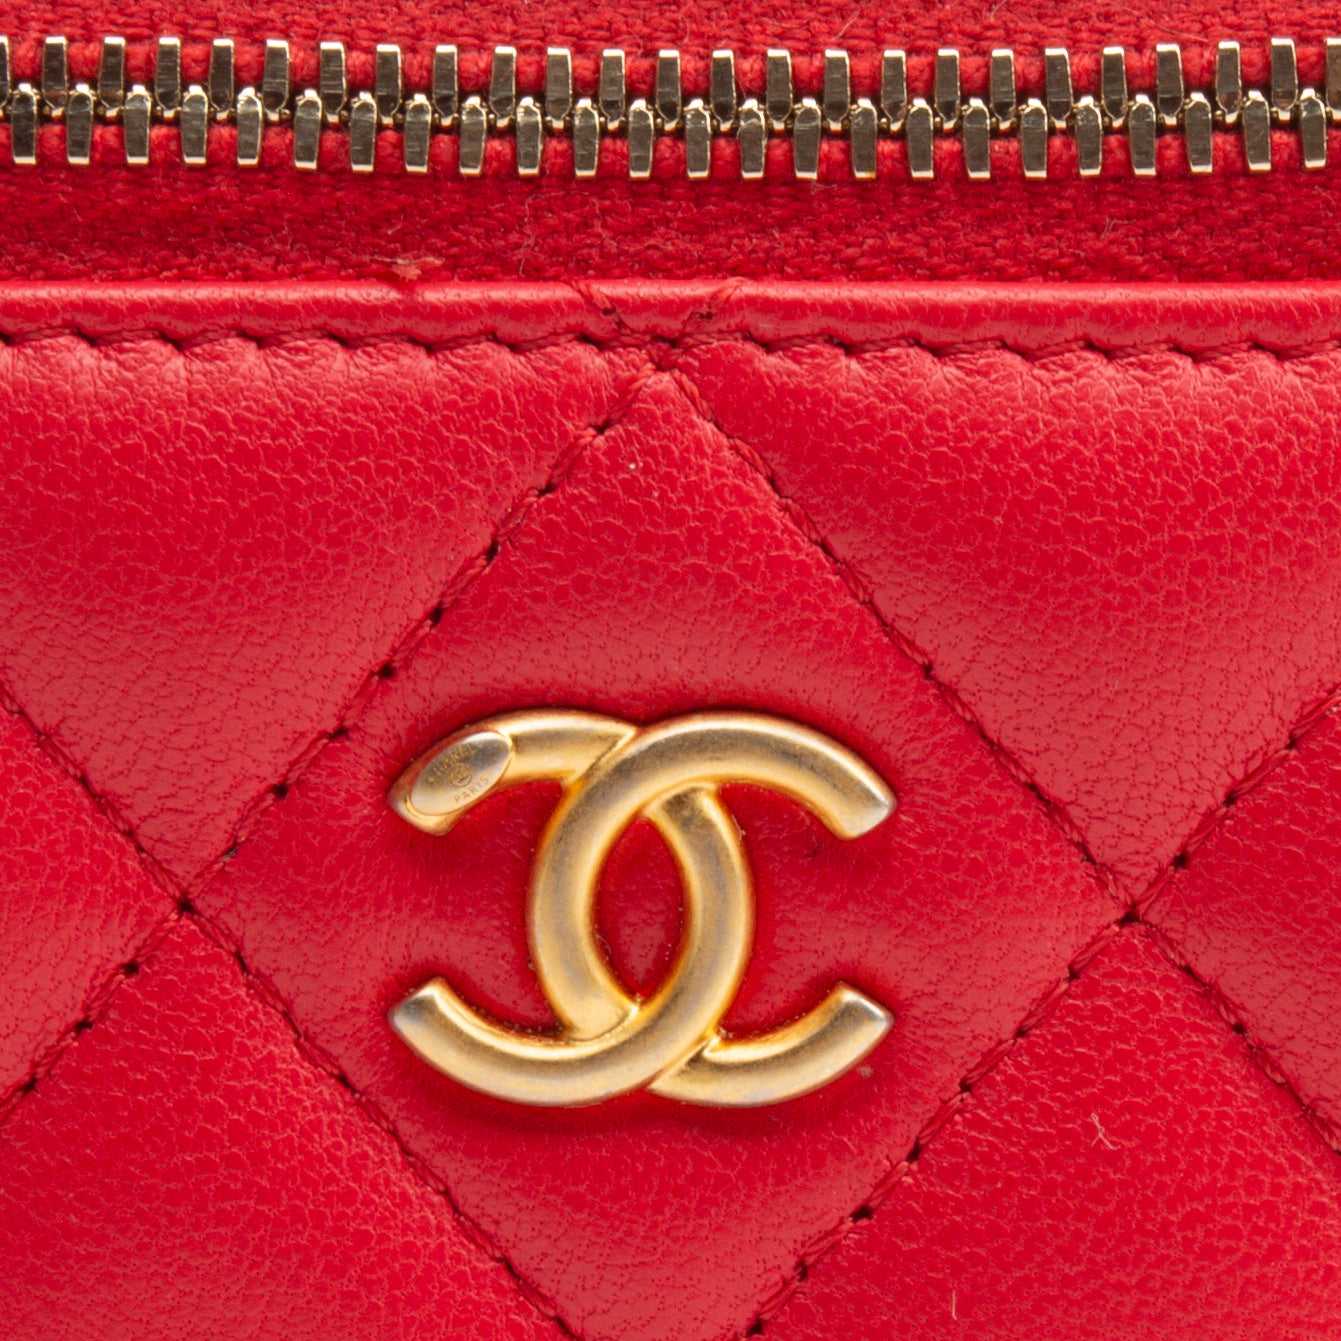 CHANEL Pearl Crush Small Vanity Case - Cherry Red